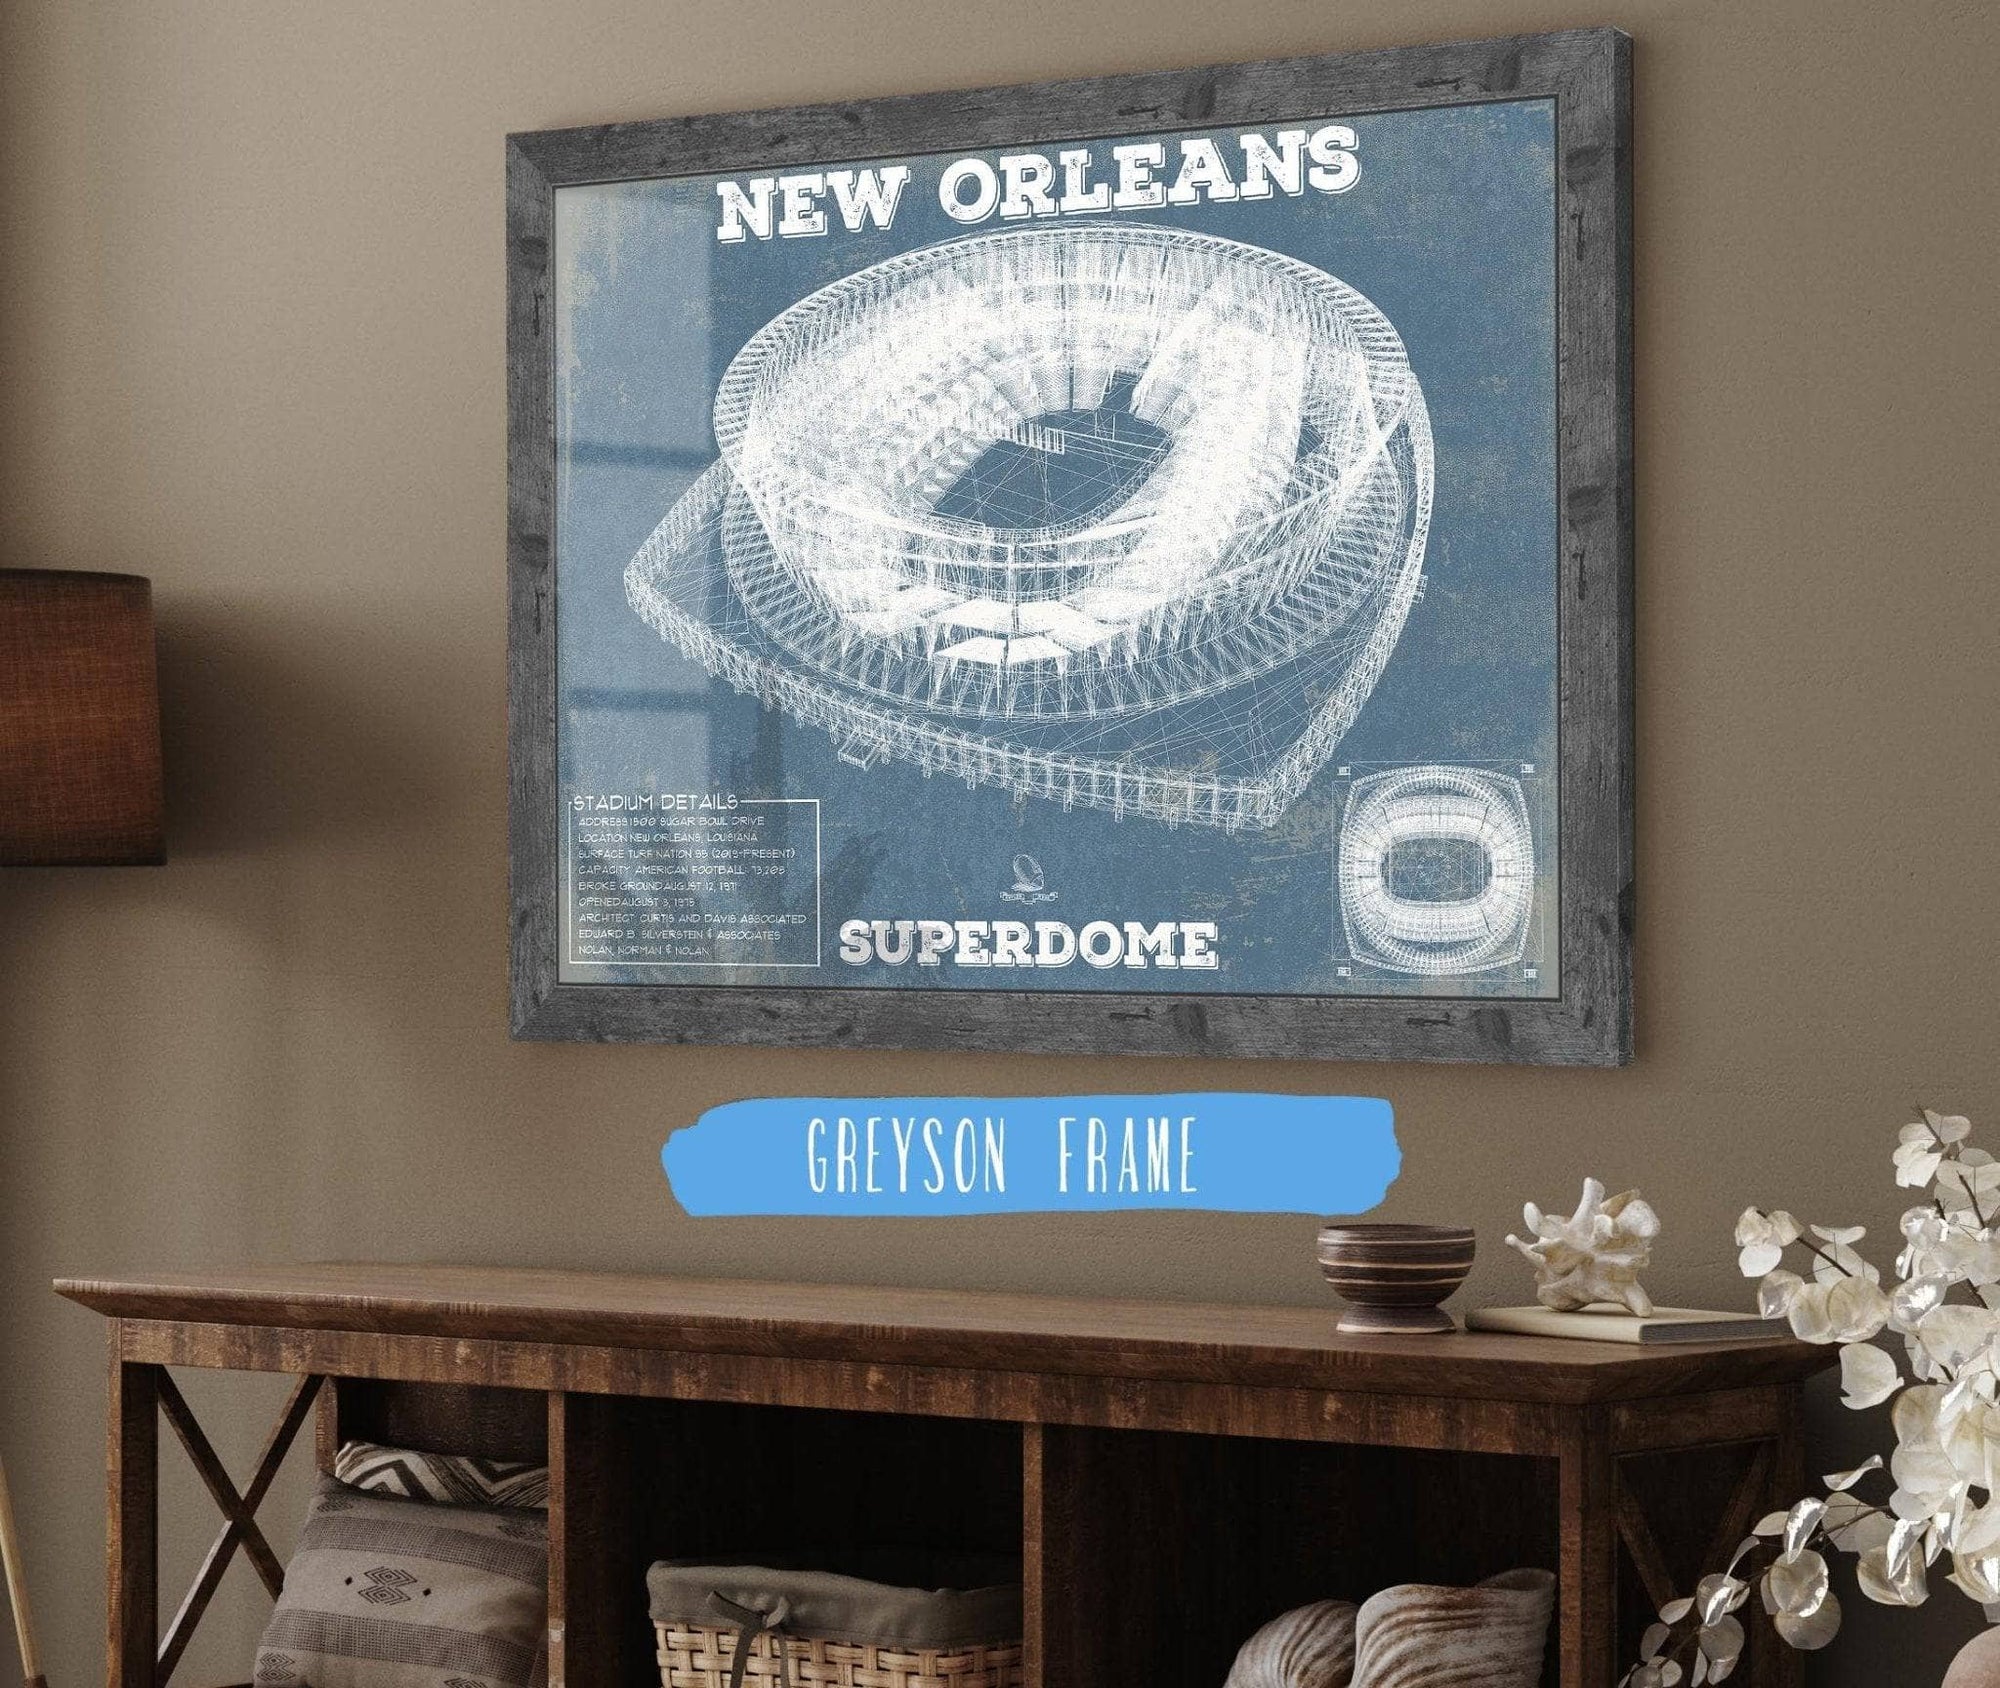 Cutler West Pro Football Collection 14" x 11" / Greyson Frame New Orleans Saints Superdome Seating Chart - Vintage Football  Team Color Print 235353090